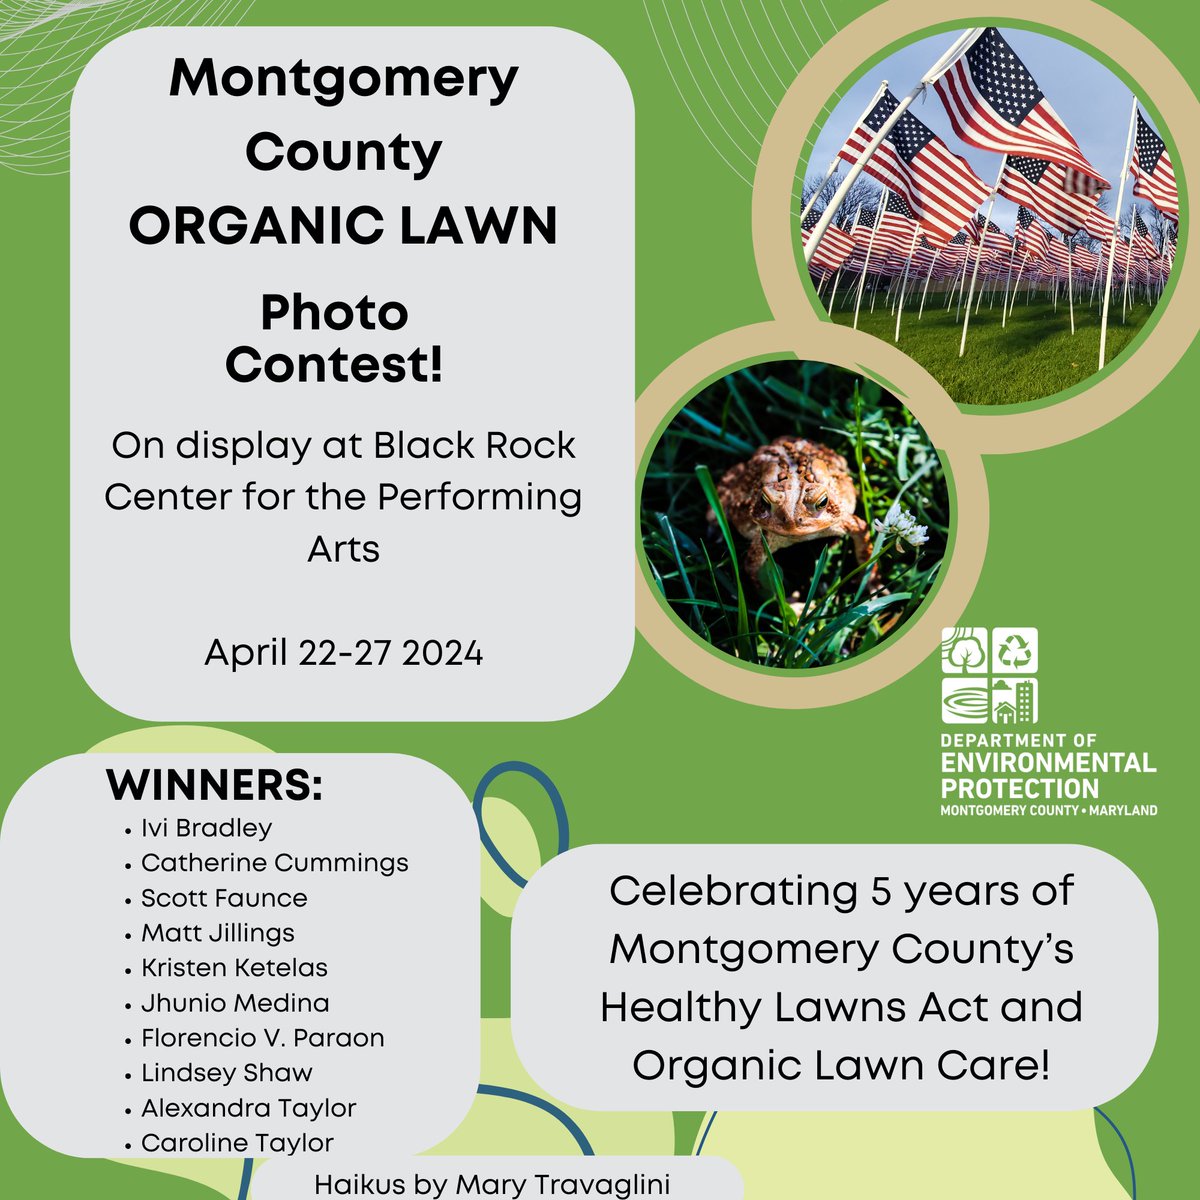 Stop by the Organic Lawn Photo Contest at BlackRock Center for the Arts through Saturday—winning photos will be on display along with some fun Haikus! Saturday is Greenfest and last day of the display -stop by for a free coloring page and enjoy the art! montgomerycountygreenfest.org